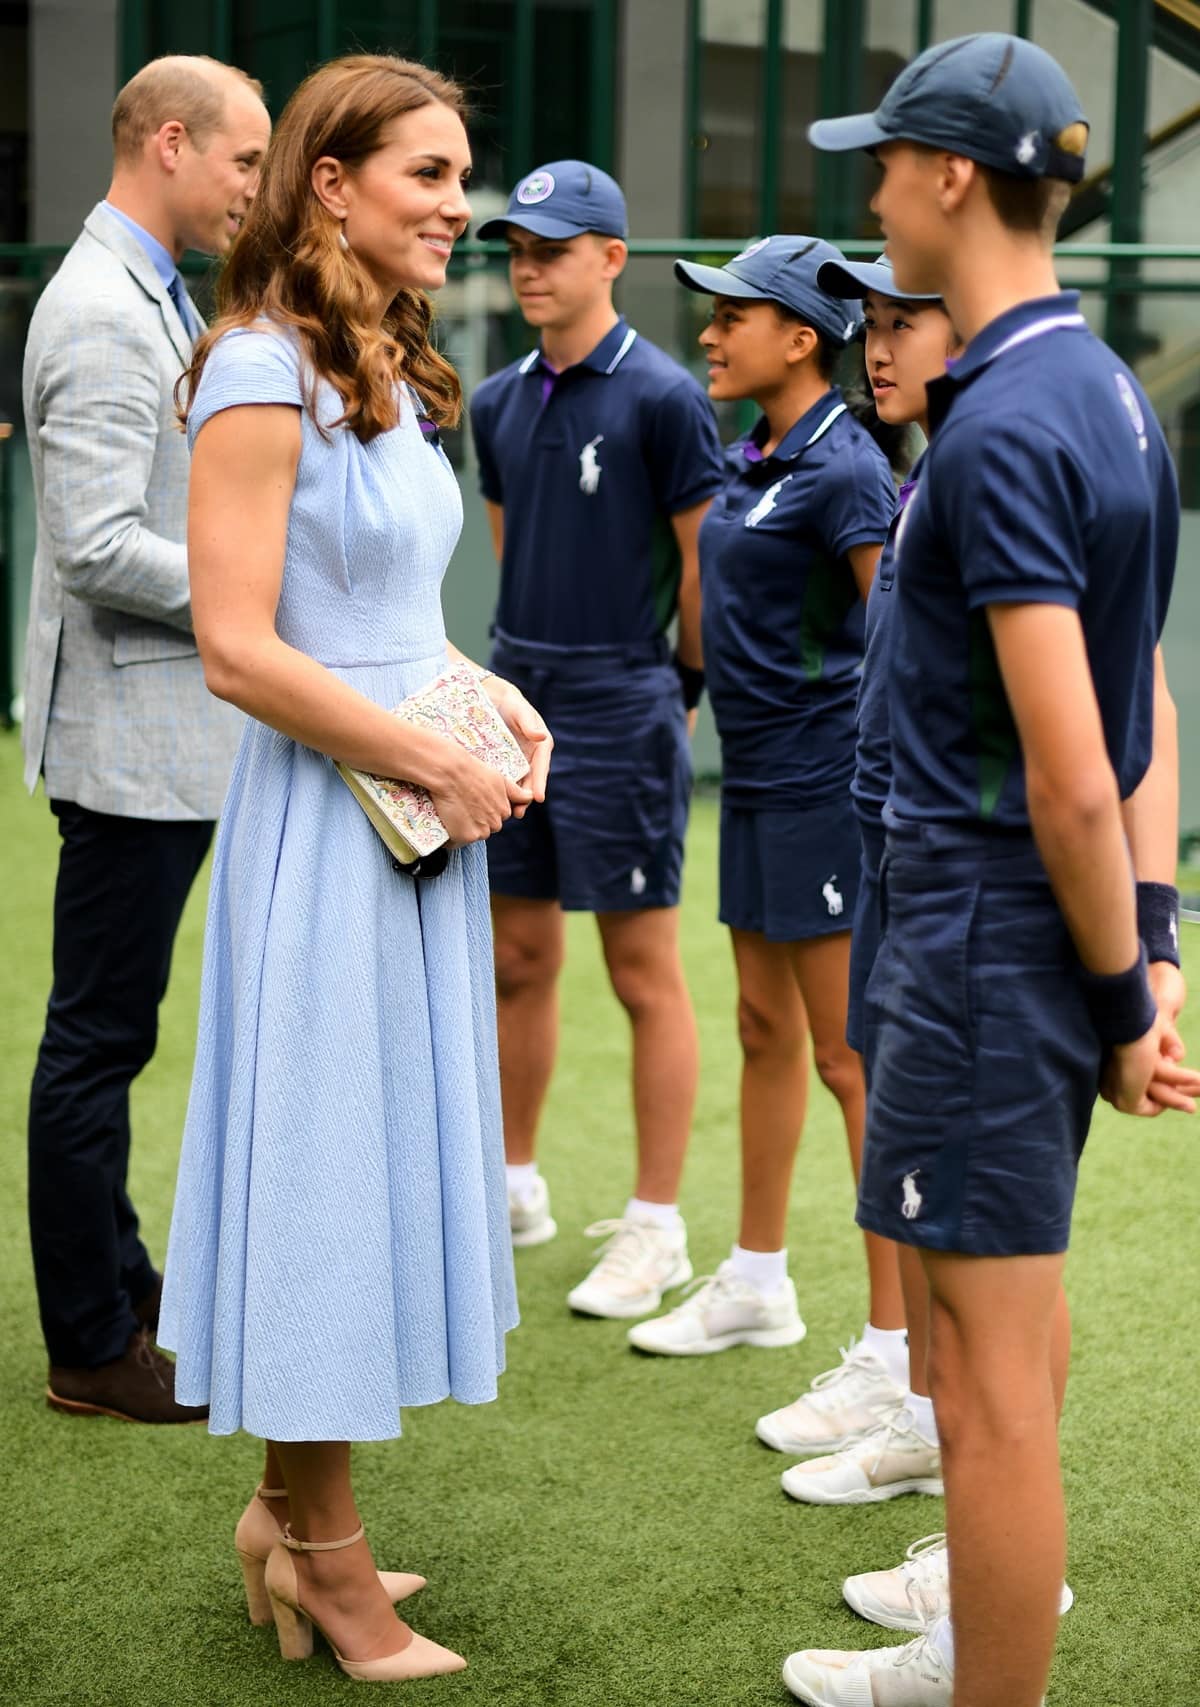 The Duchess of Cambridge looked stunning at the 2019 men's Wimbledon finals in an exquisite blue crepe ensemble by Emilia Wickstead styled with a delicate beaded white clutch and nude Aldo 'Nicholes' heels